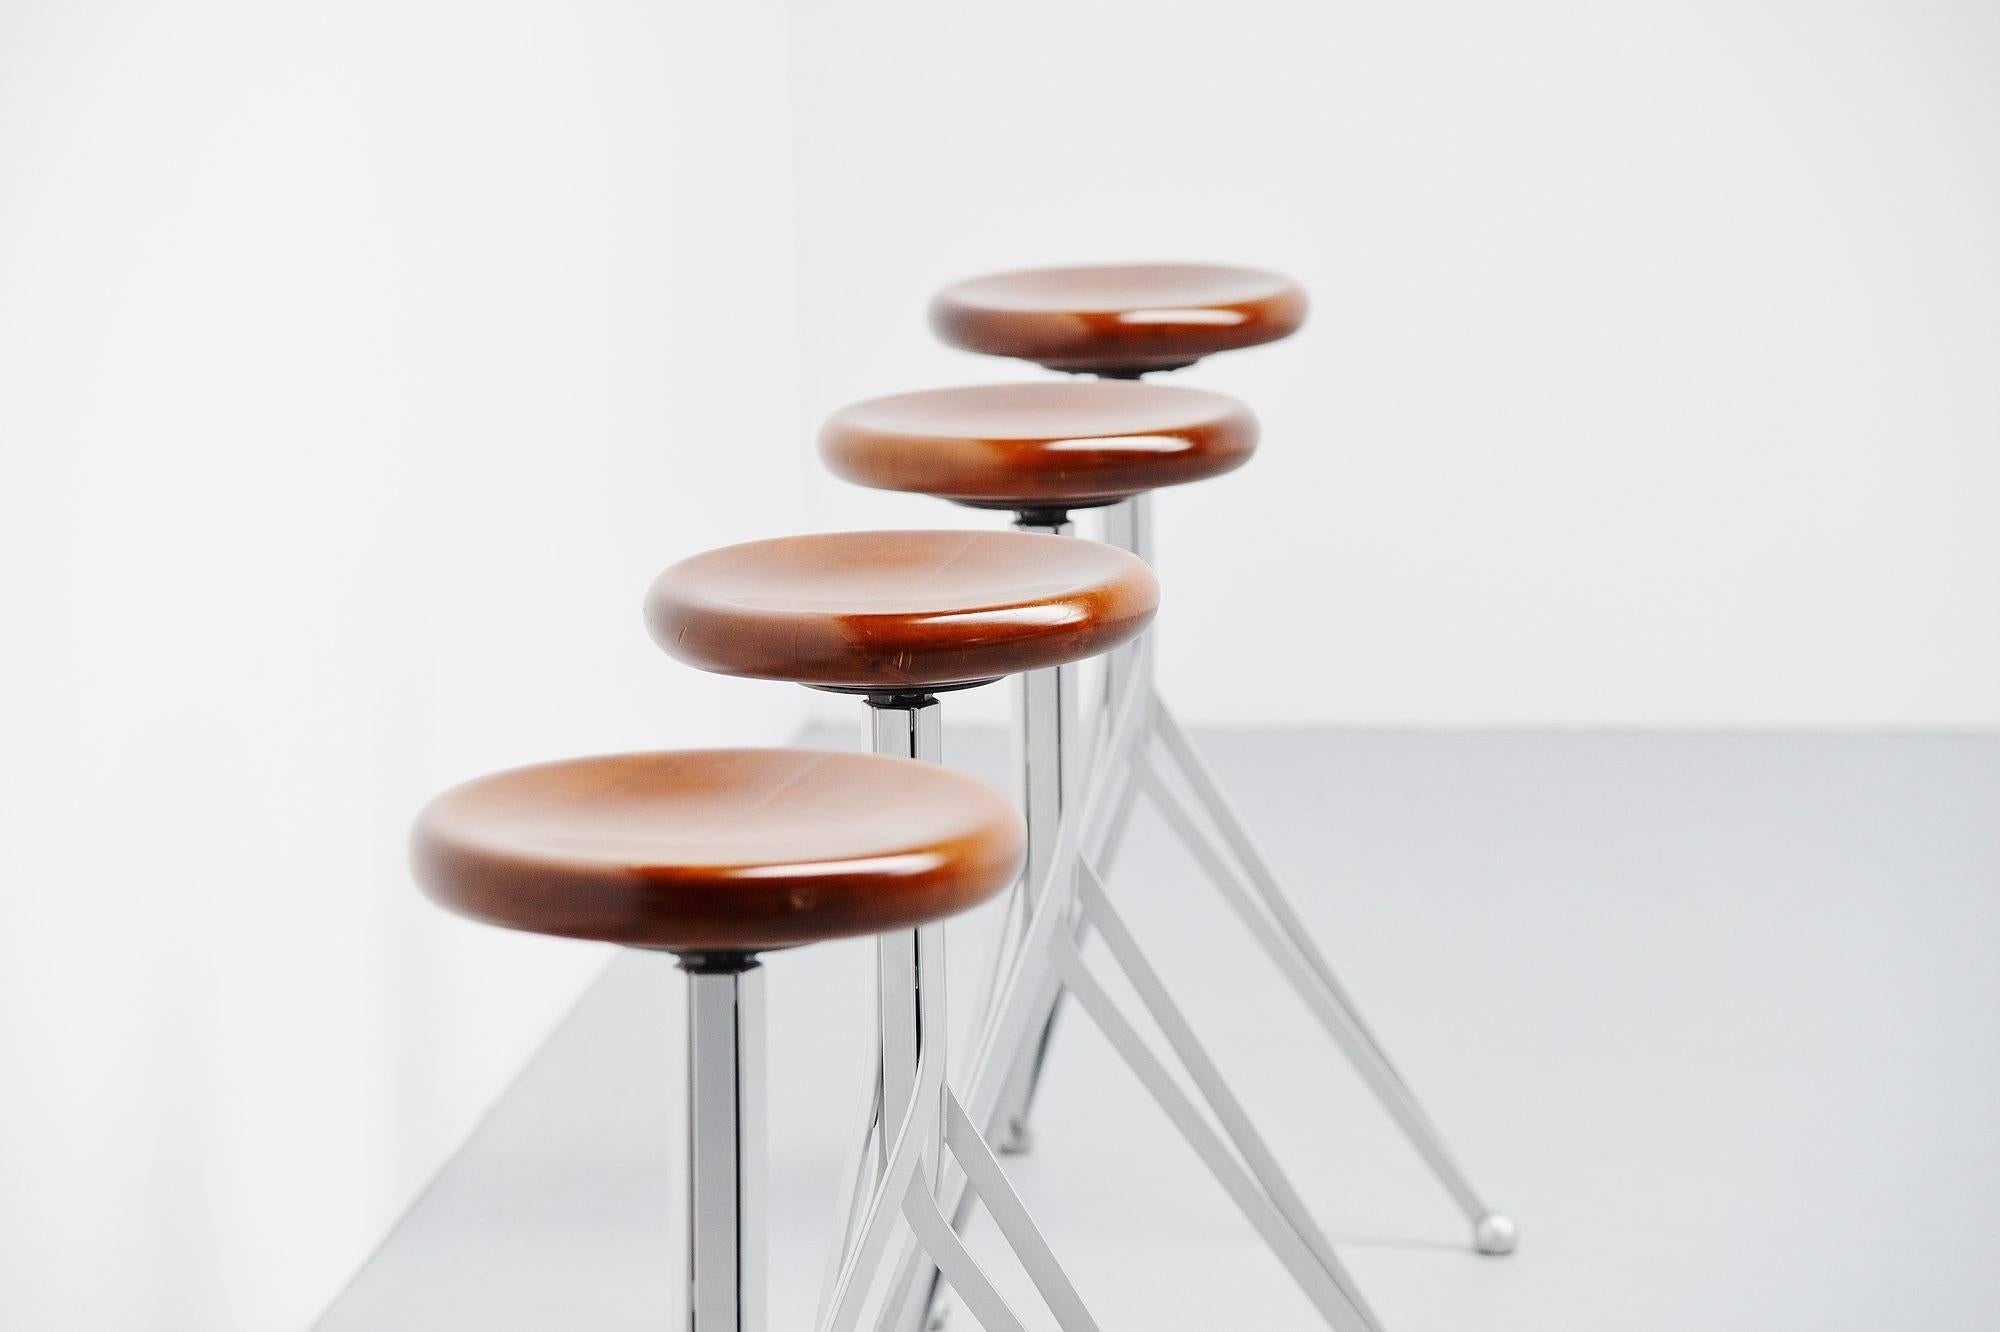 Rare set of four bar stools designed by English designer Ron Arad for Zeus, Italy, 1994. These stools are from the Anonimus series by Arad and are no longer in production. The stools have a grey lacquered metal base, brown stained wooden seats